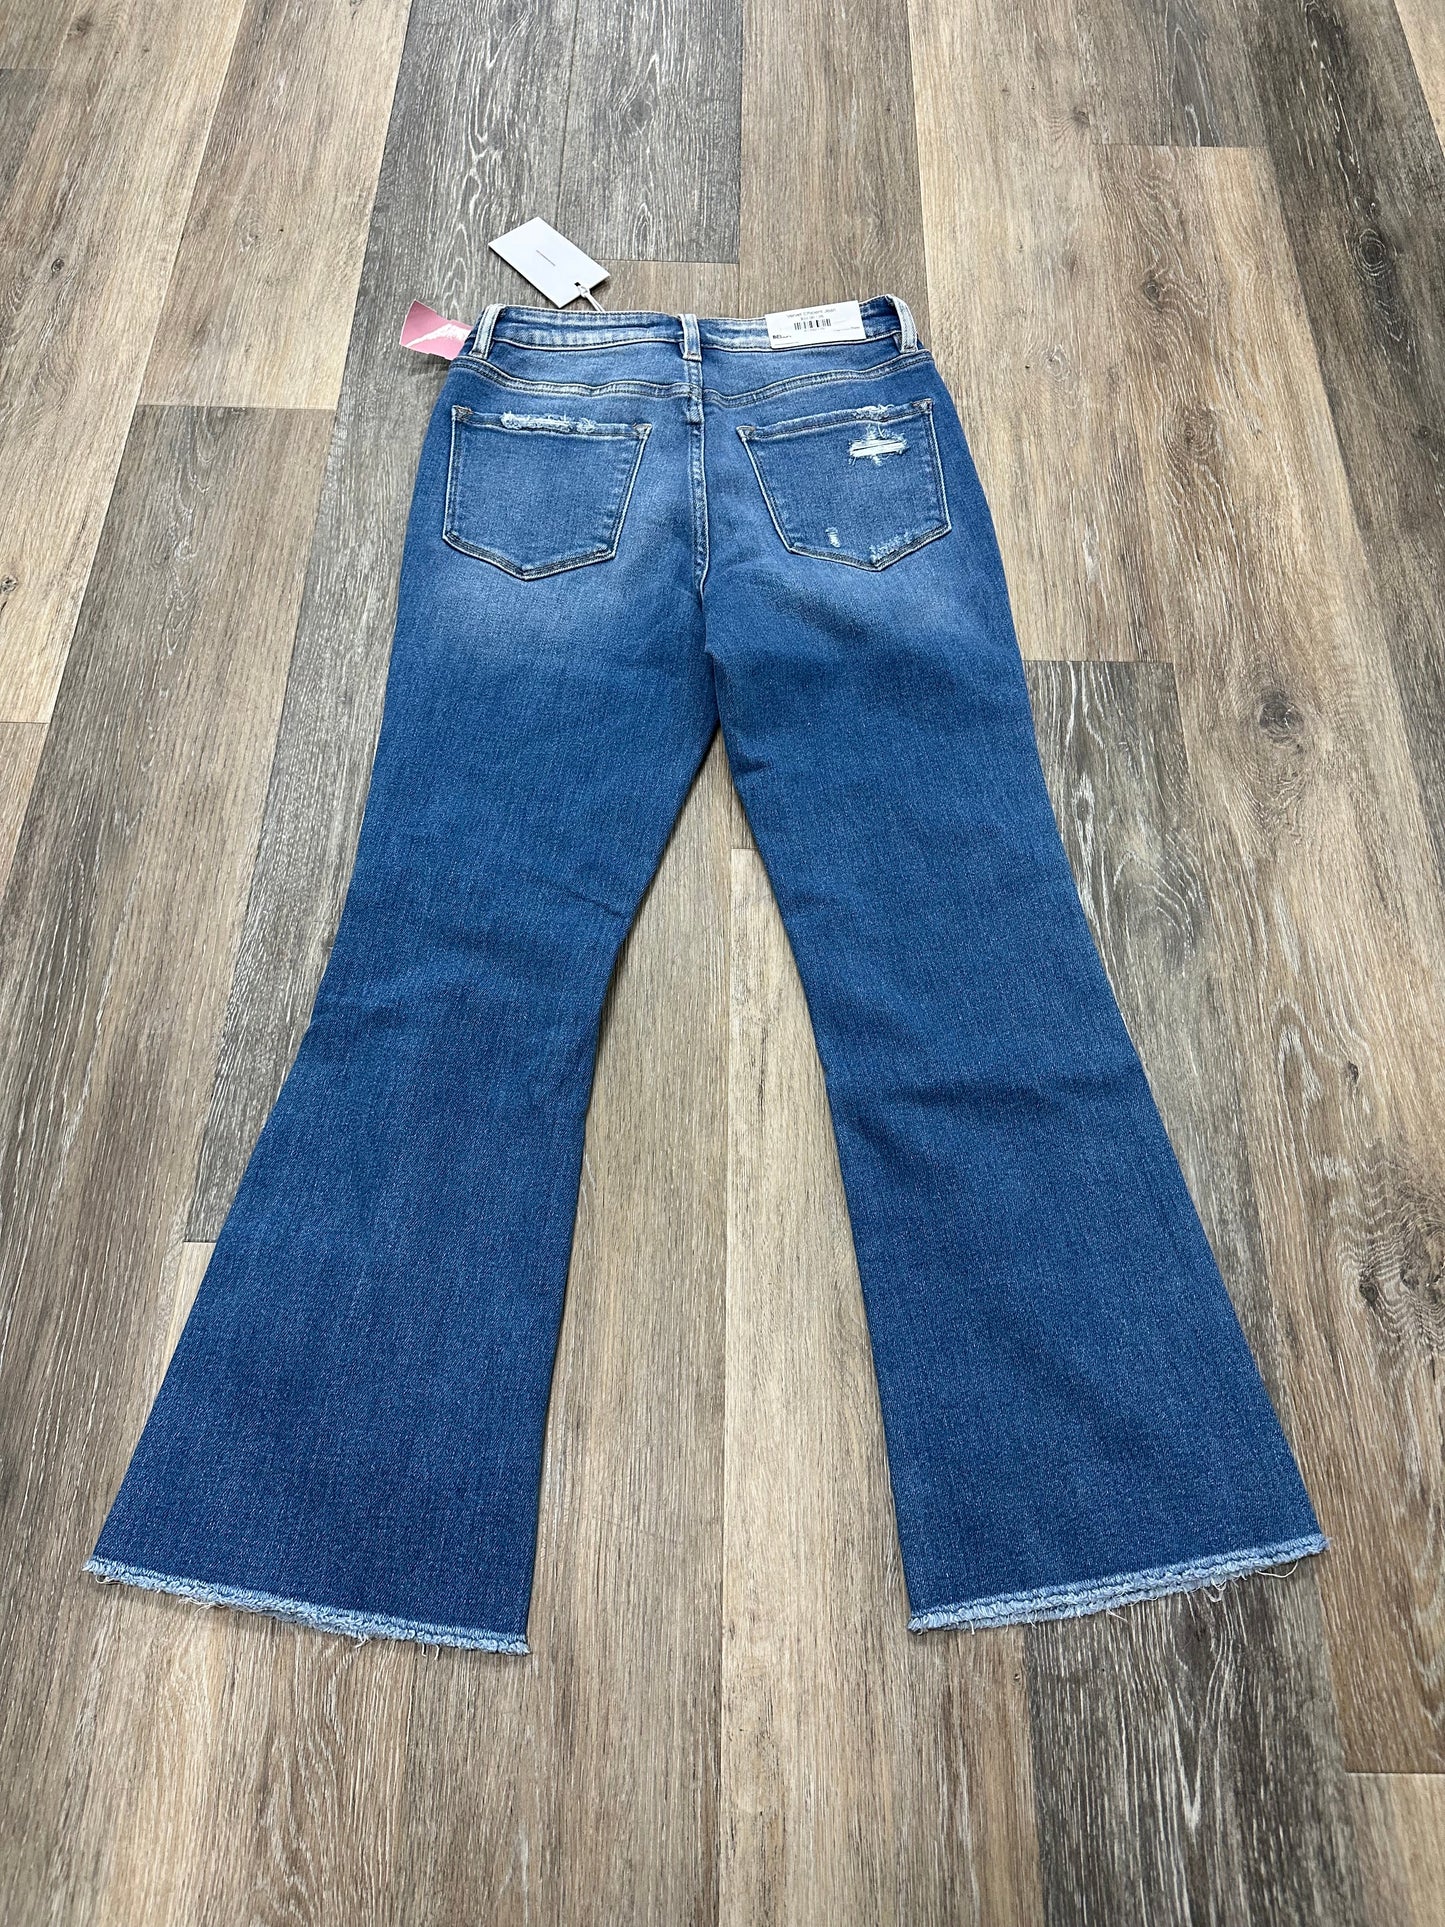 Jeans Flared By Vervet  Size: 2